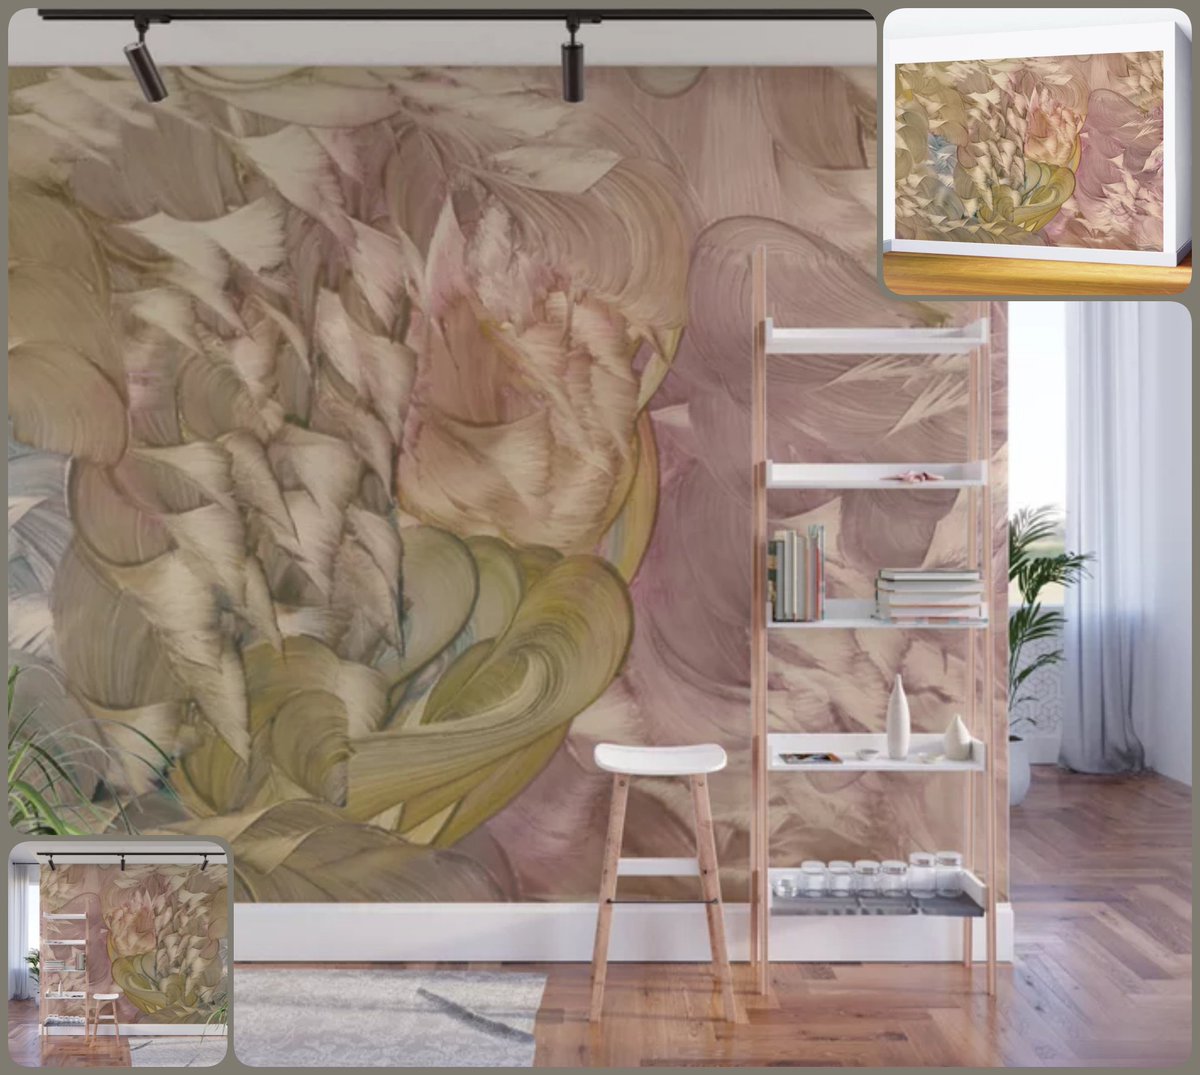 Blooming Abundance Wall Mural~A step beyond Exquisite decor!~
by Art Falaxy #artfalaxy #art #murals #homedecor #society6 #wallart #painting #Society6max #accents #swirls #modern #trendy #pink #peach #yellow

society6.com/product/bloomi…